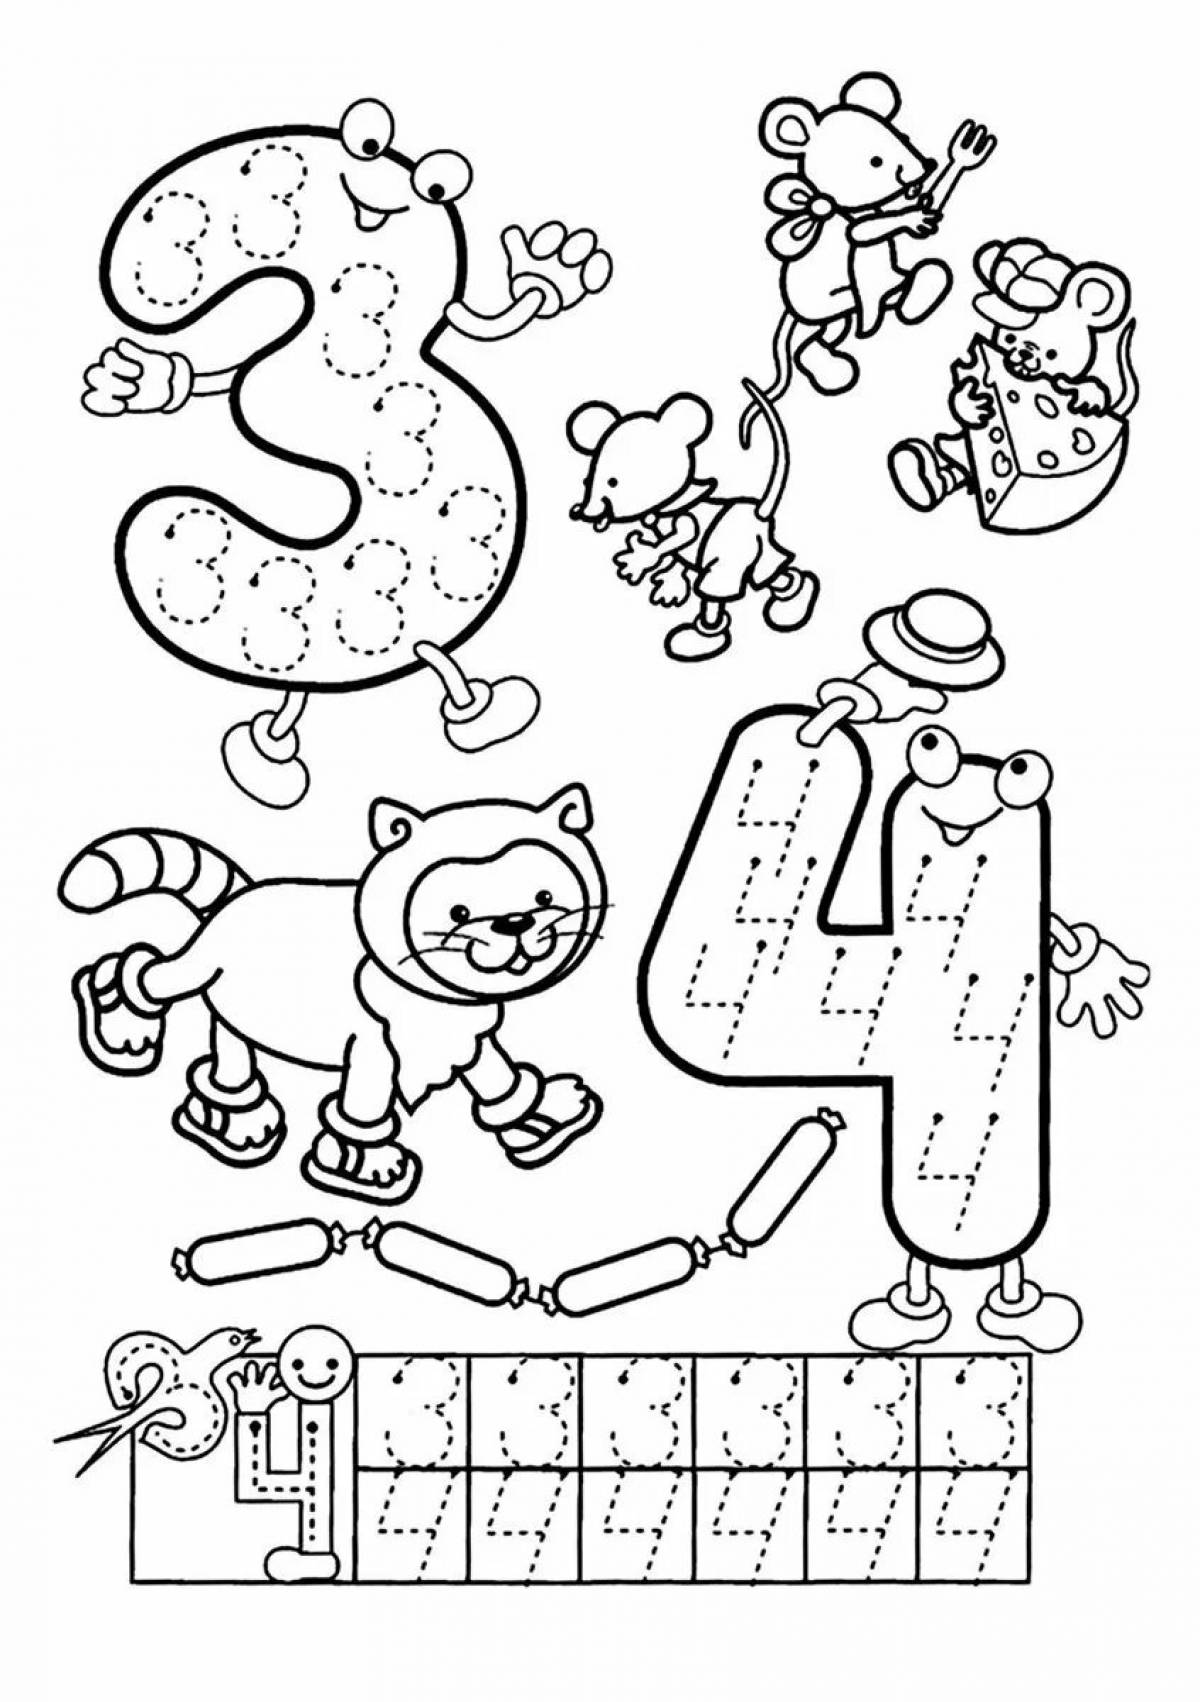 Coloring page with amazing numbers